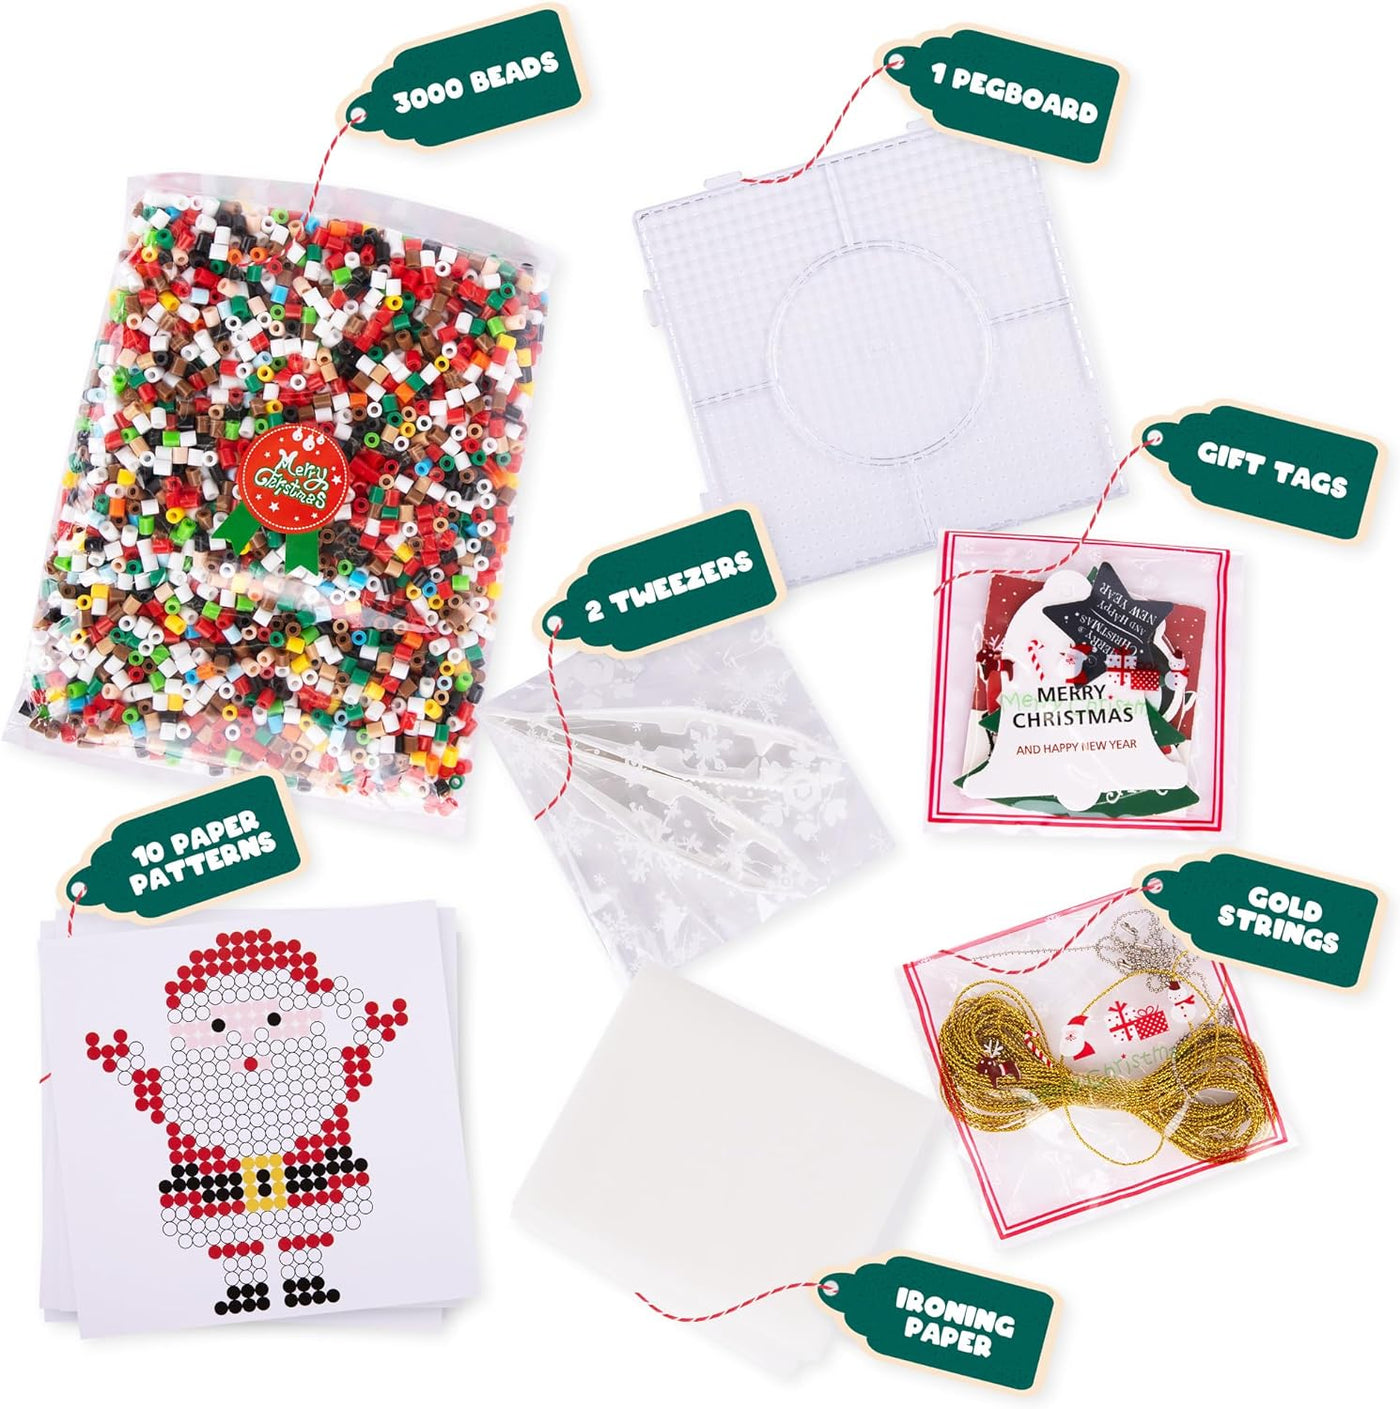 Christmas Fuse Beads Kit - Christmas Beads for Crafts with 3000 Fuse Beads (Bulk), 10 Patterns, 1 Pegboard, Tweezers, Ironing Paper, Gift Tags, and Gold Strings - Bead Art Christmas Craft for Kids